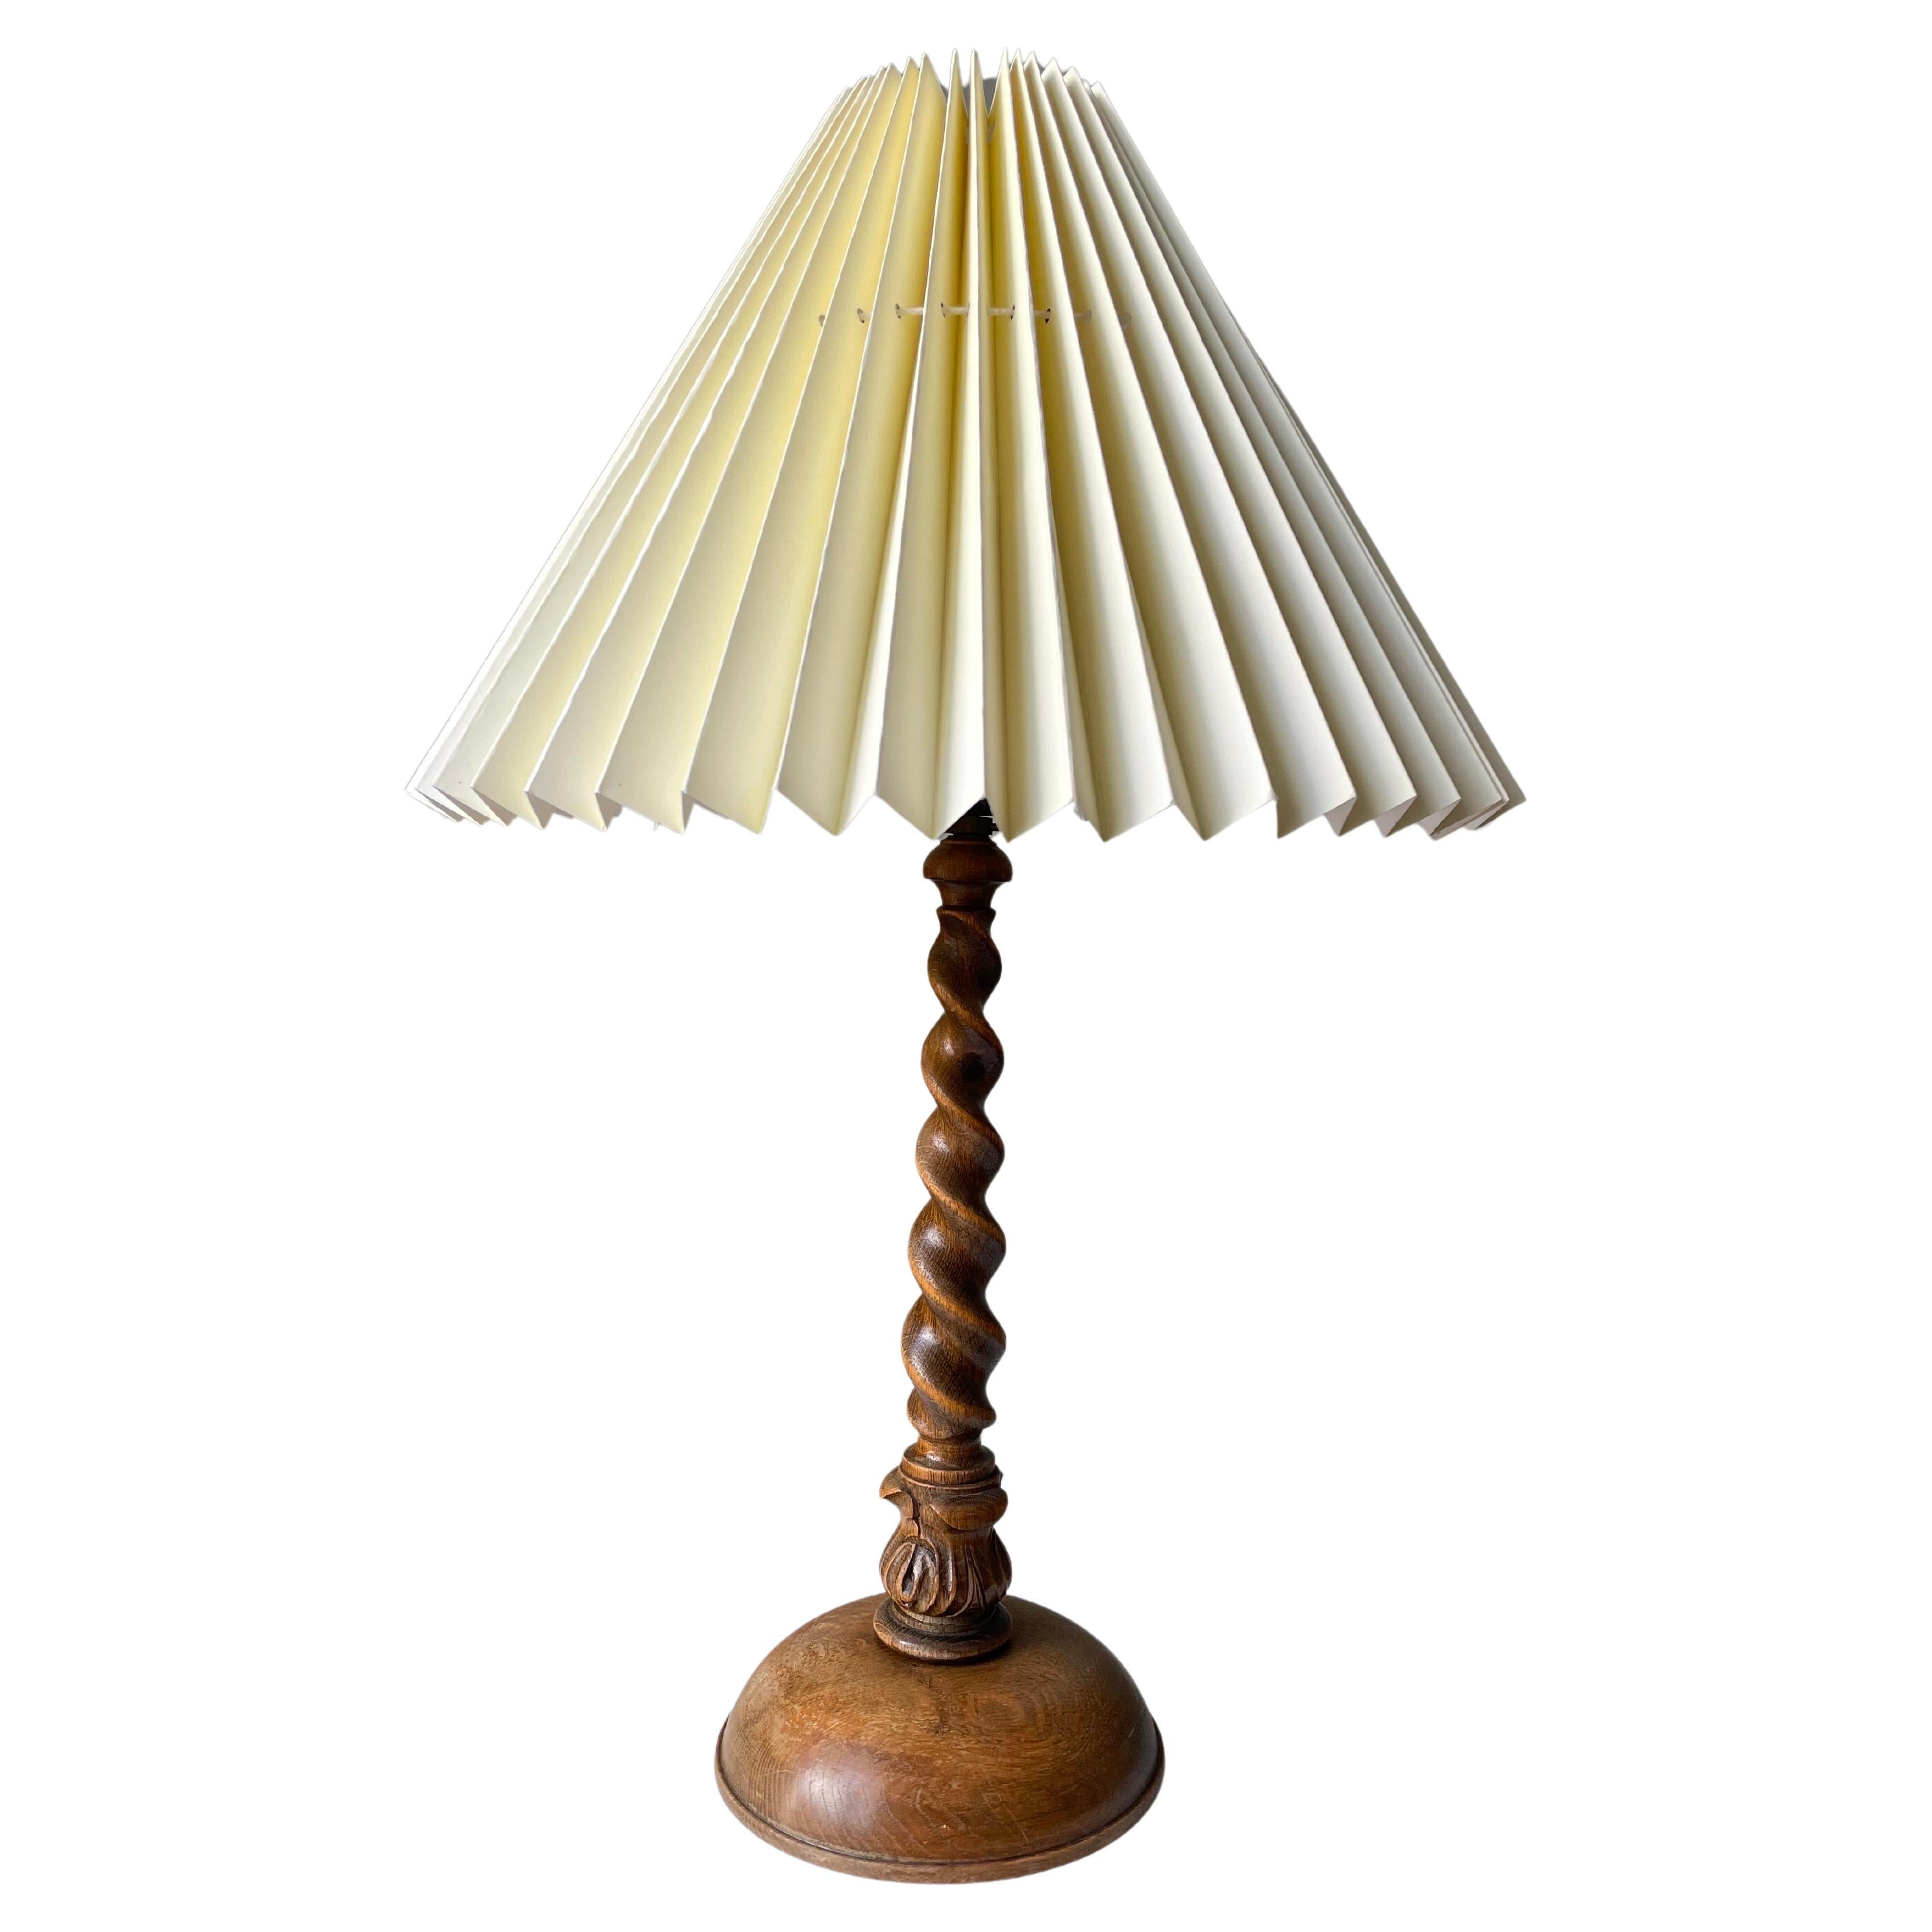 Tall Vintage Swirling Wooden Table Lamp, 1960s For Sale